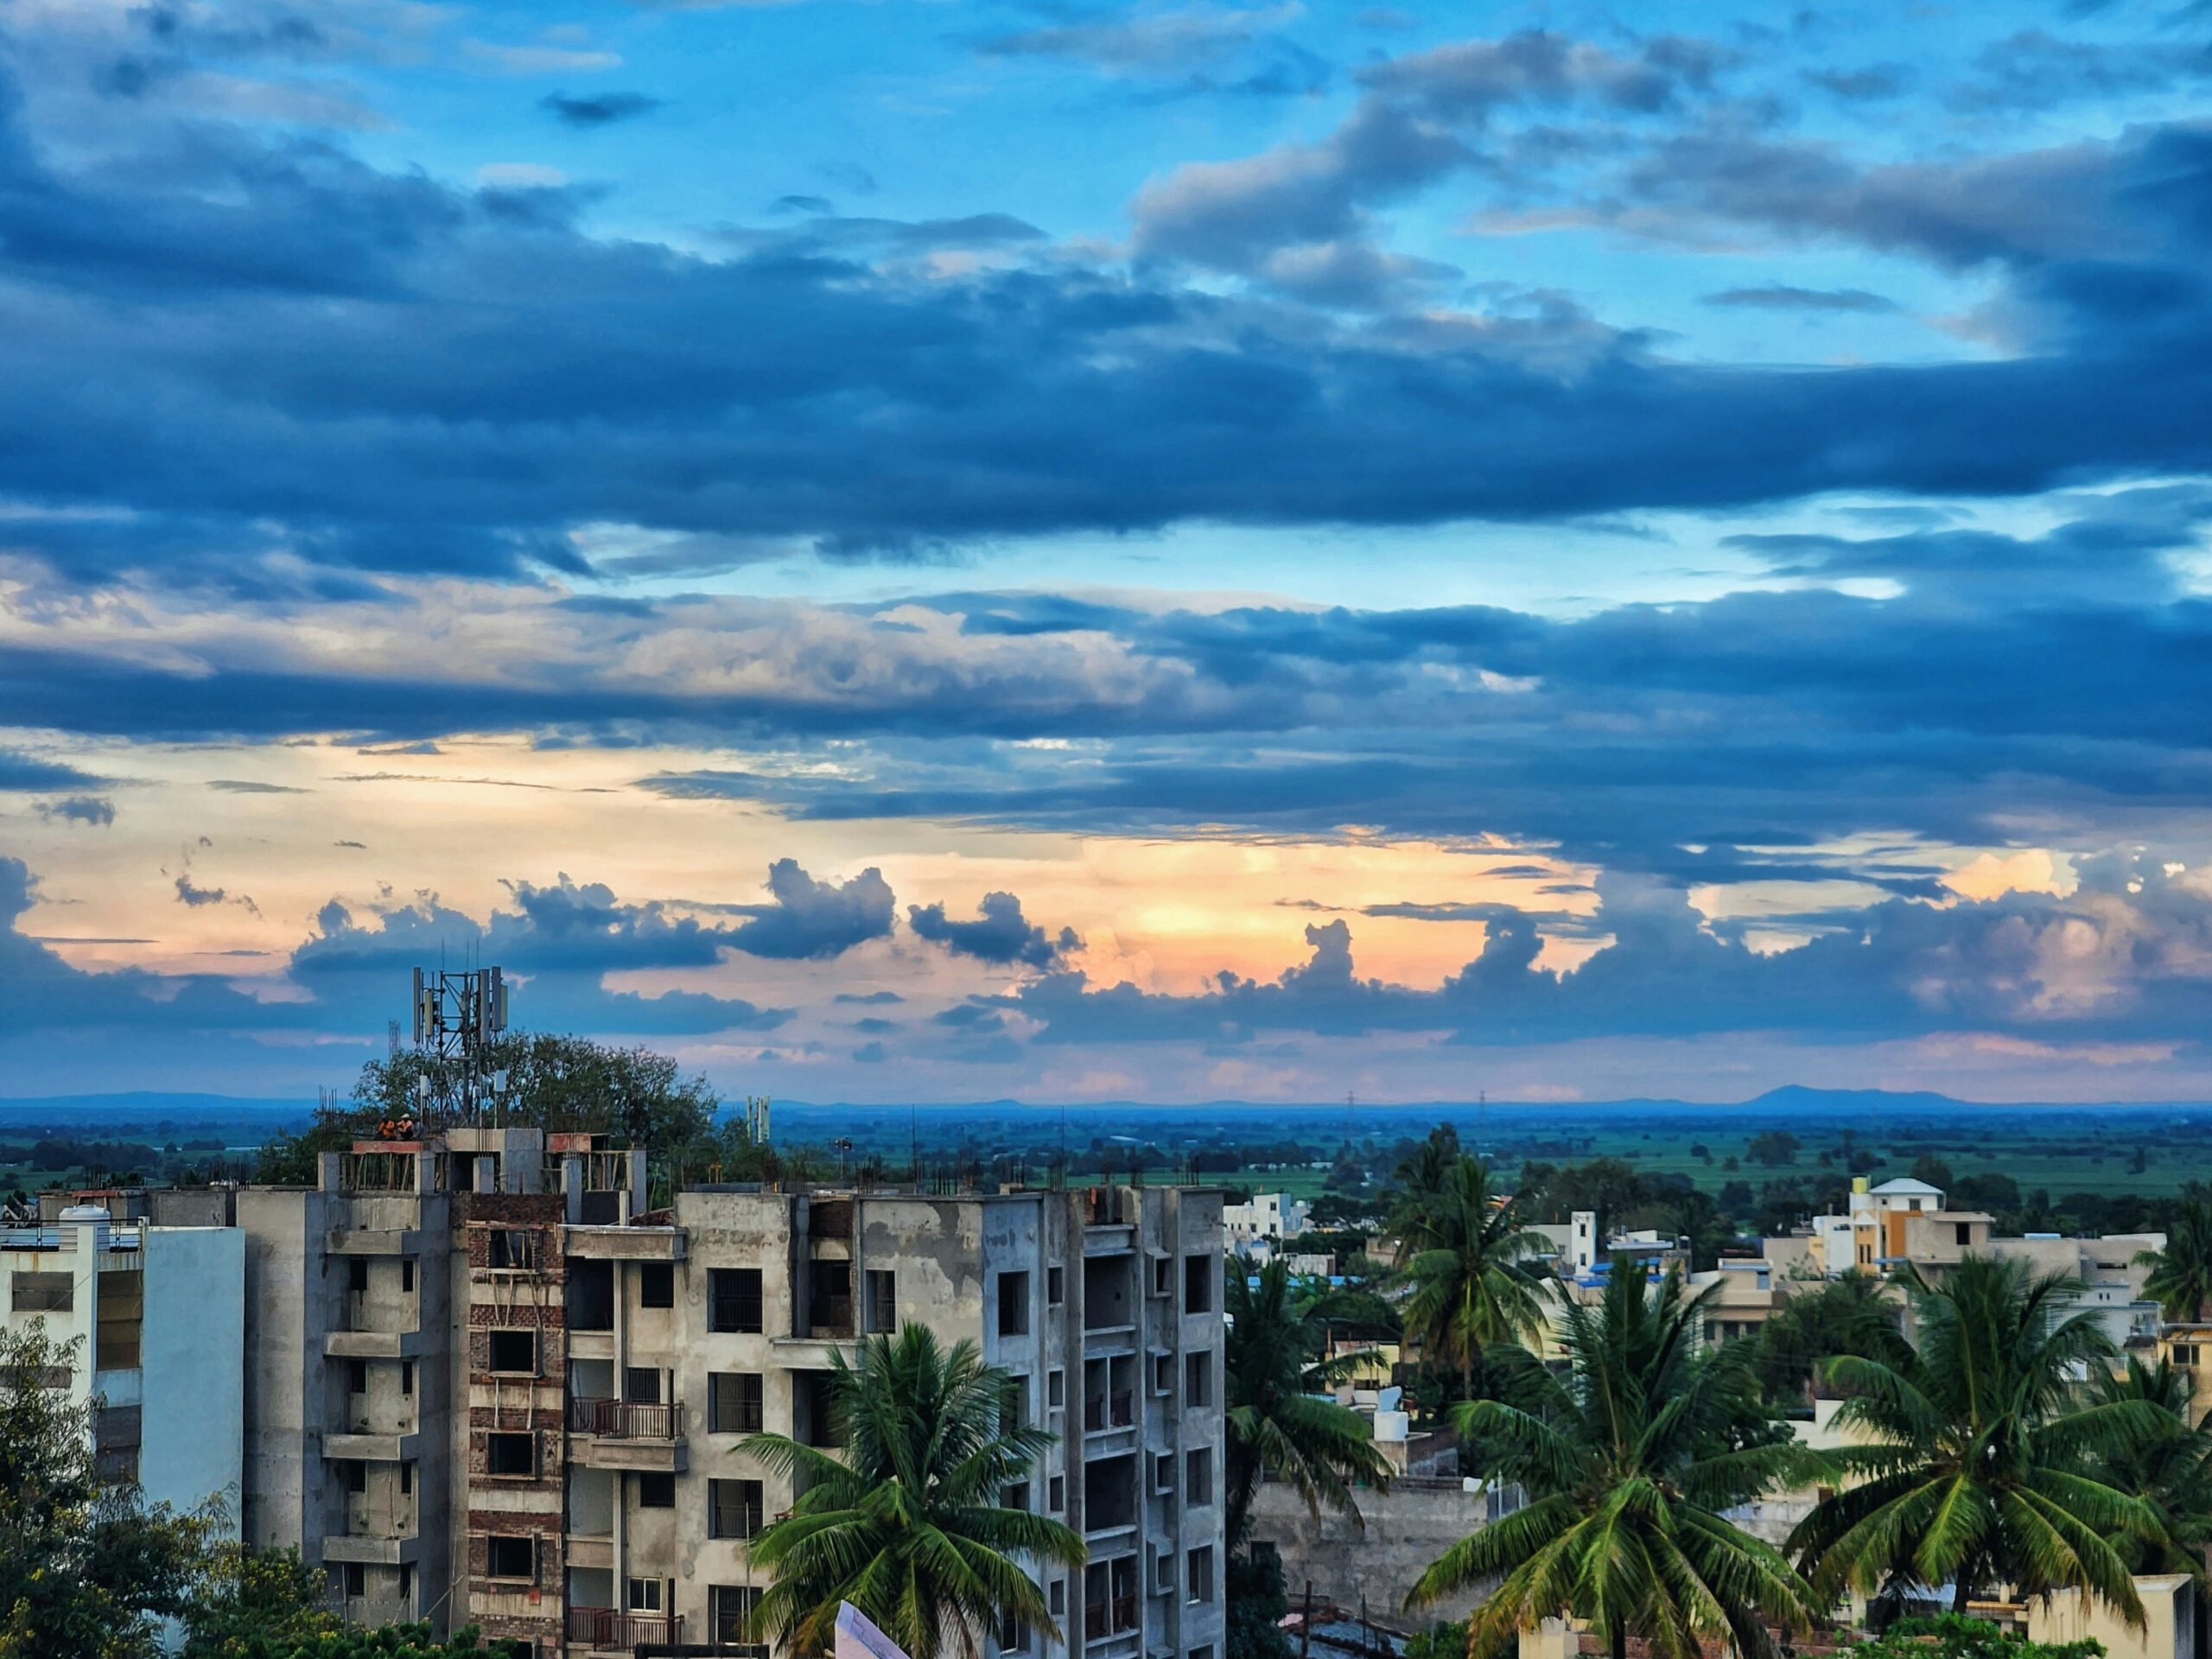 a view of a city with palm trees and clouds